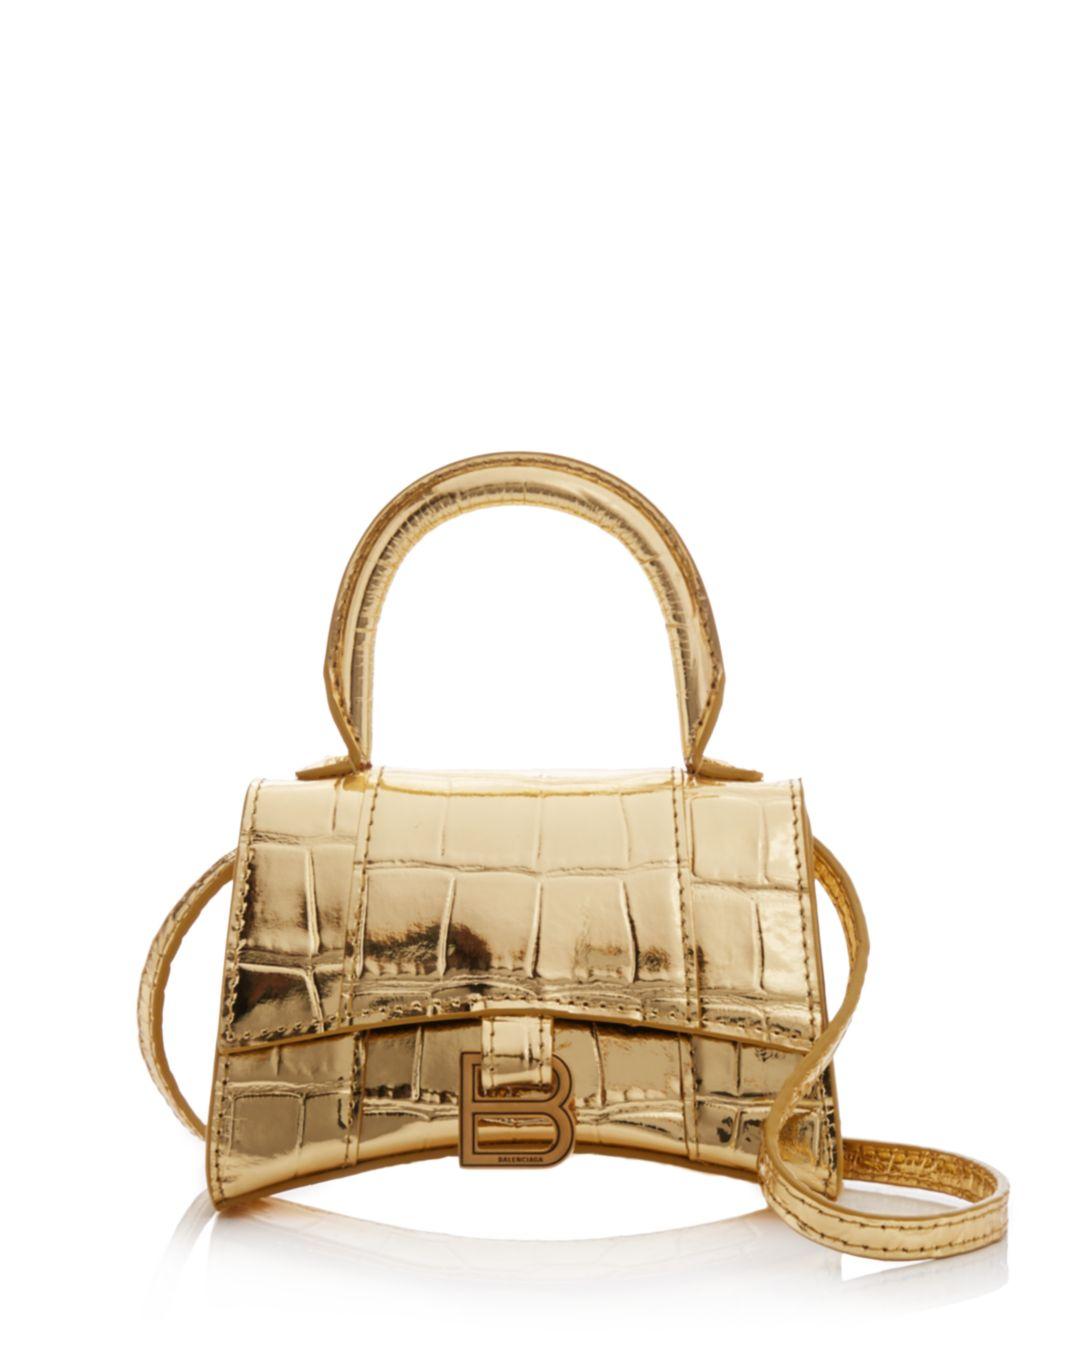 Balenciaga Hourglass Mini Embossed Leather Top Handle Bag in Gold 